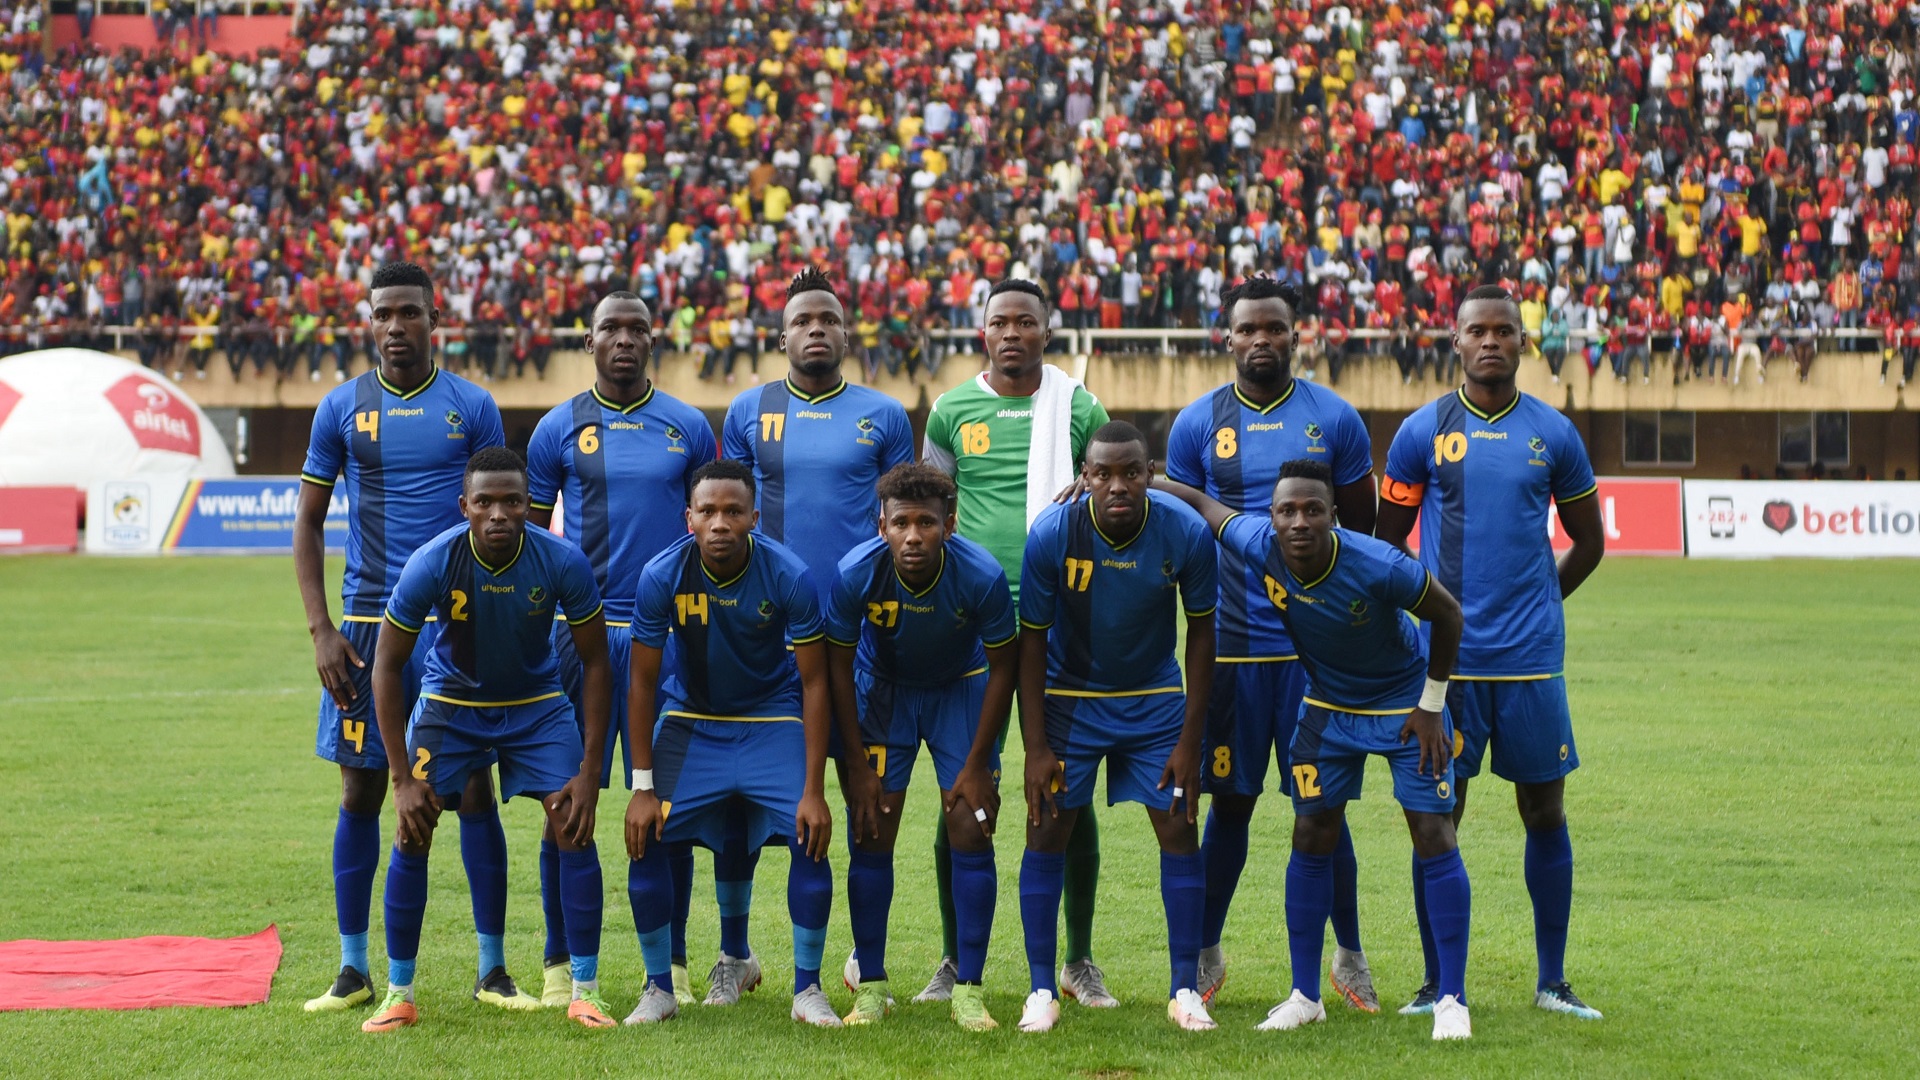 Tanzanian National Soccer Team Qualifies For AFCON After 39-year Wait.